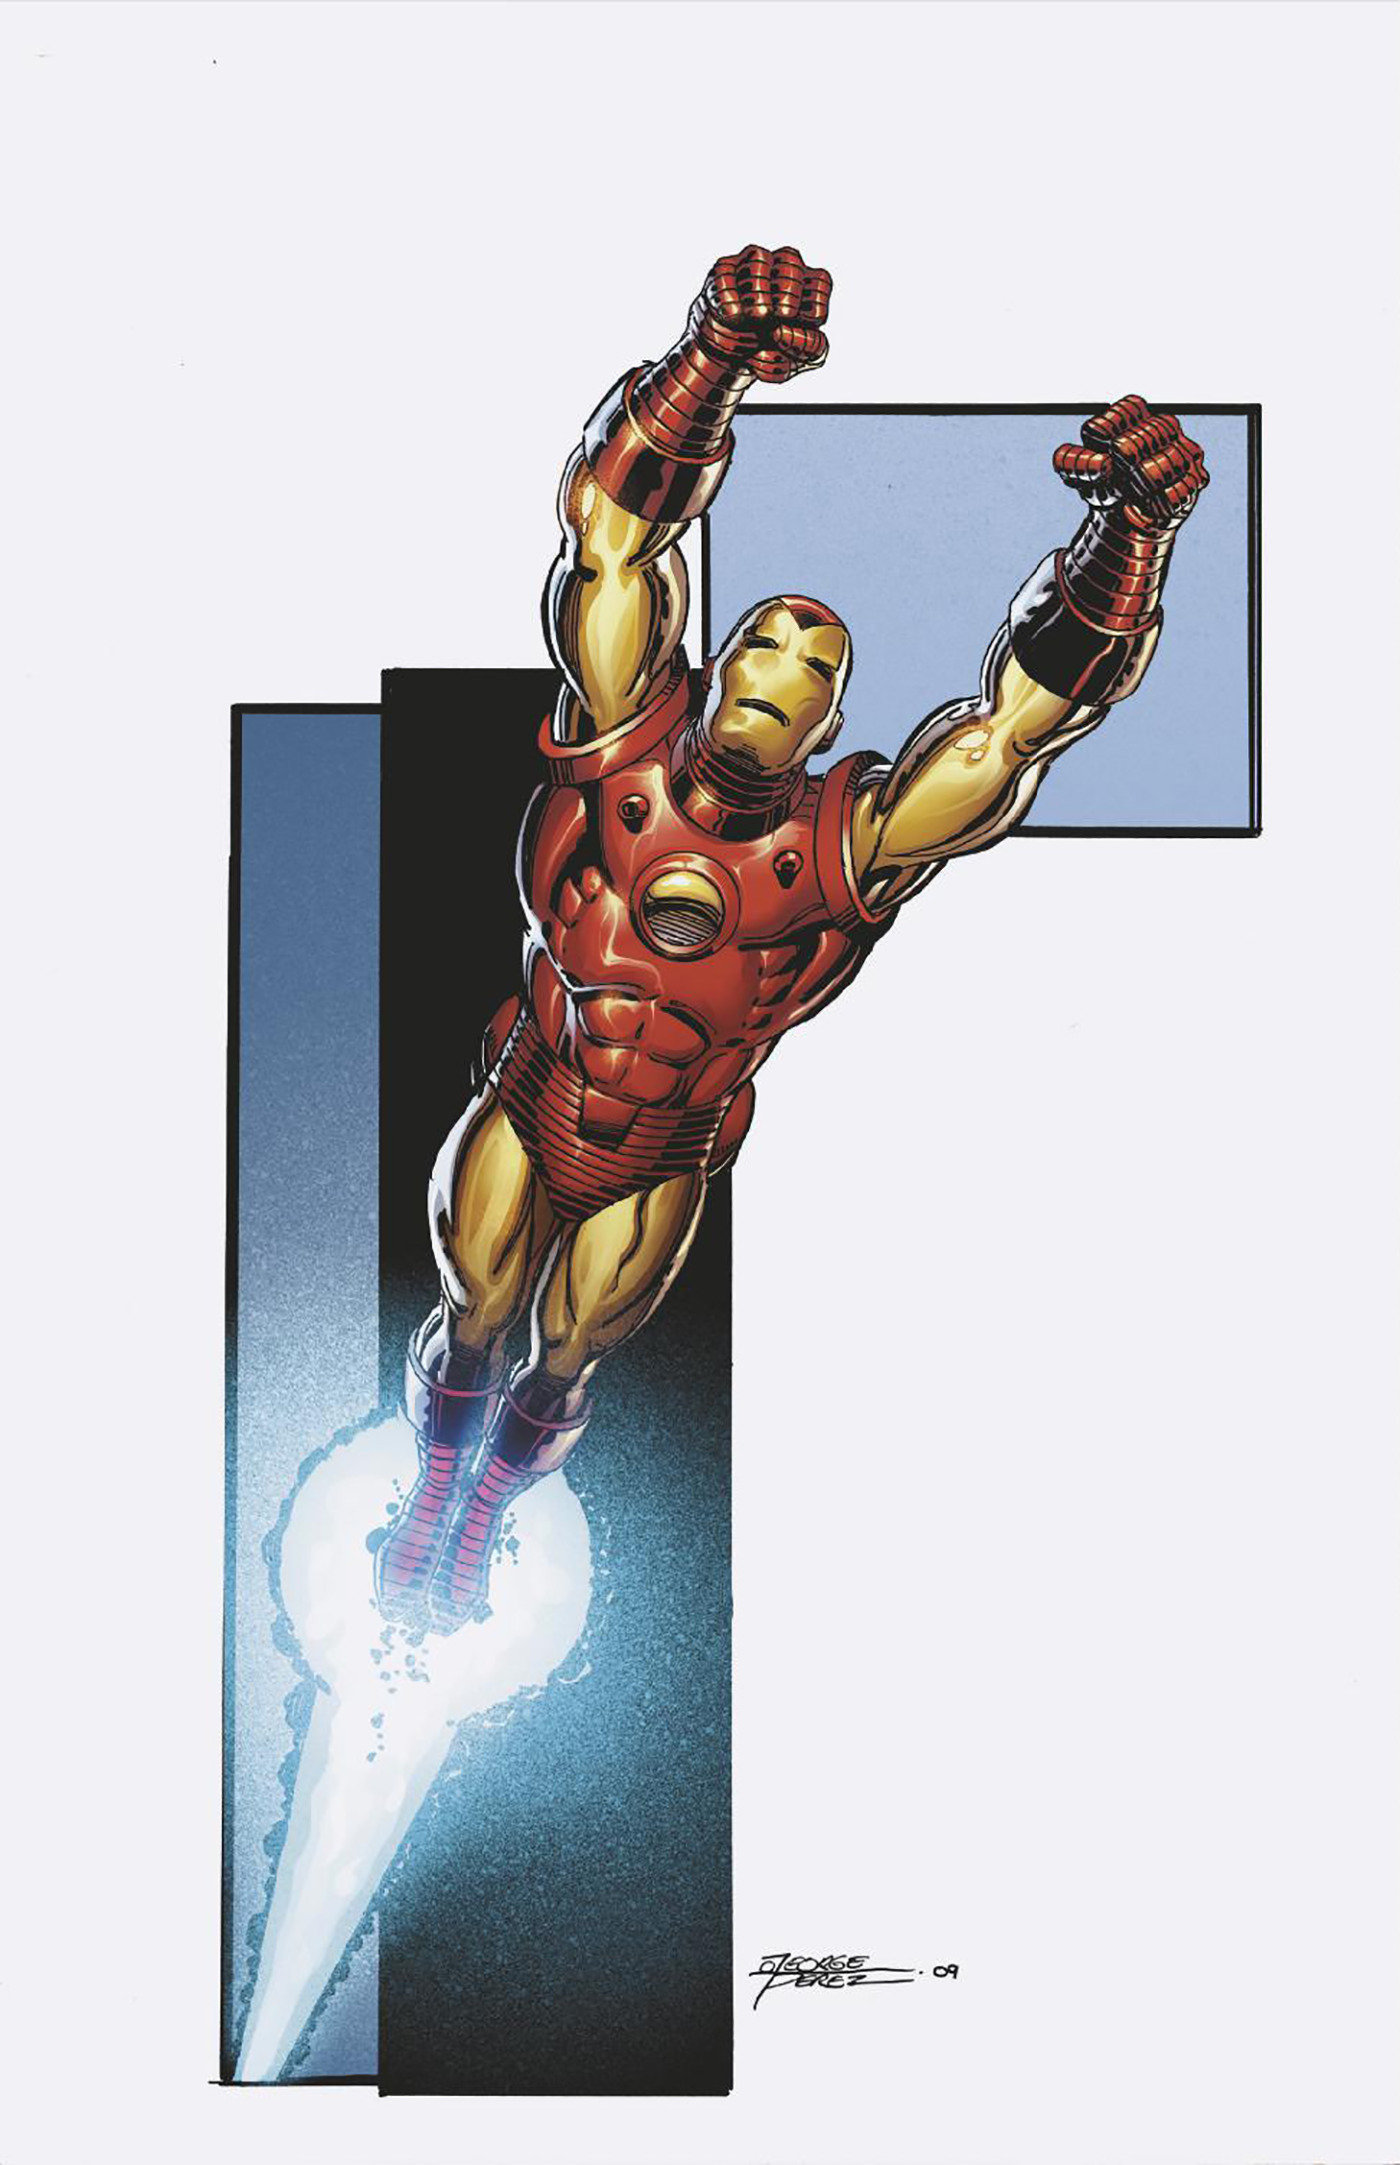 Invincible Iron Man #10 George Perez 1 for 100 Virgin Variant (Fall of the X-Men)